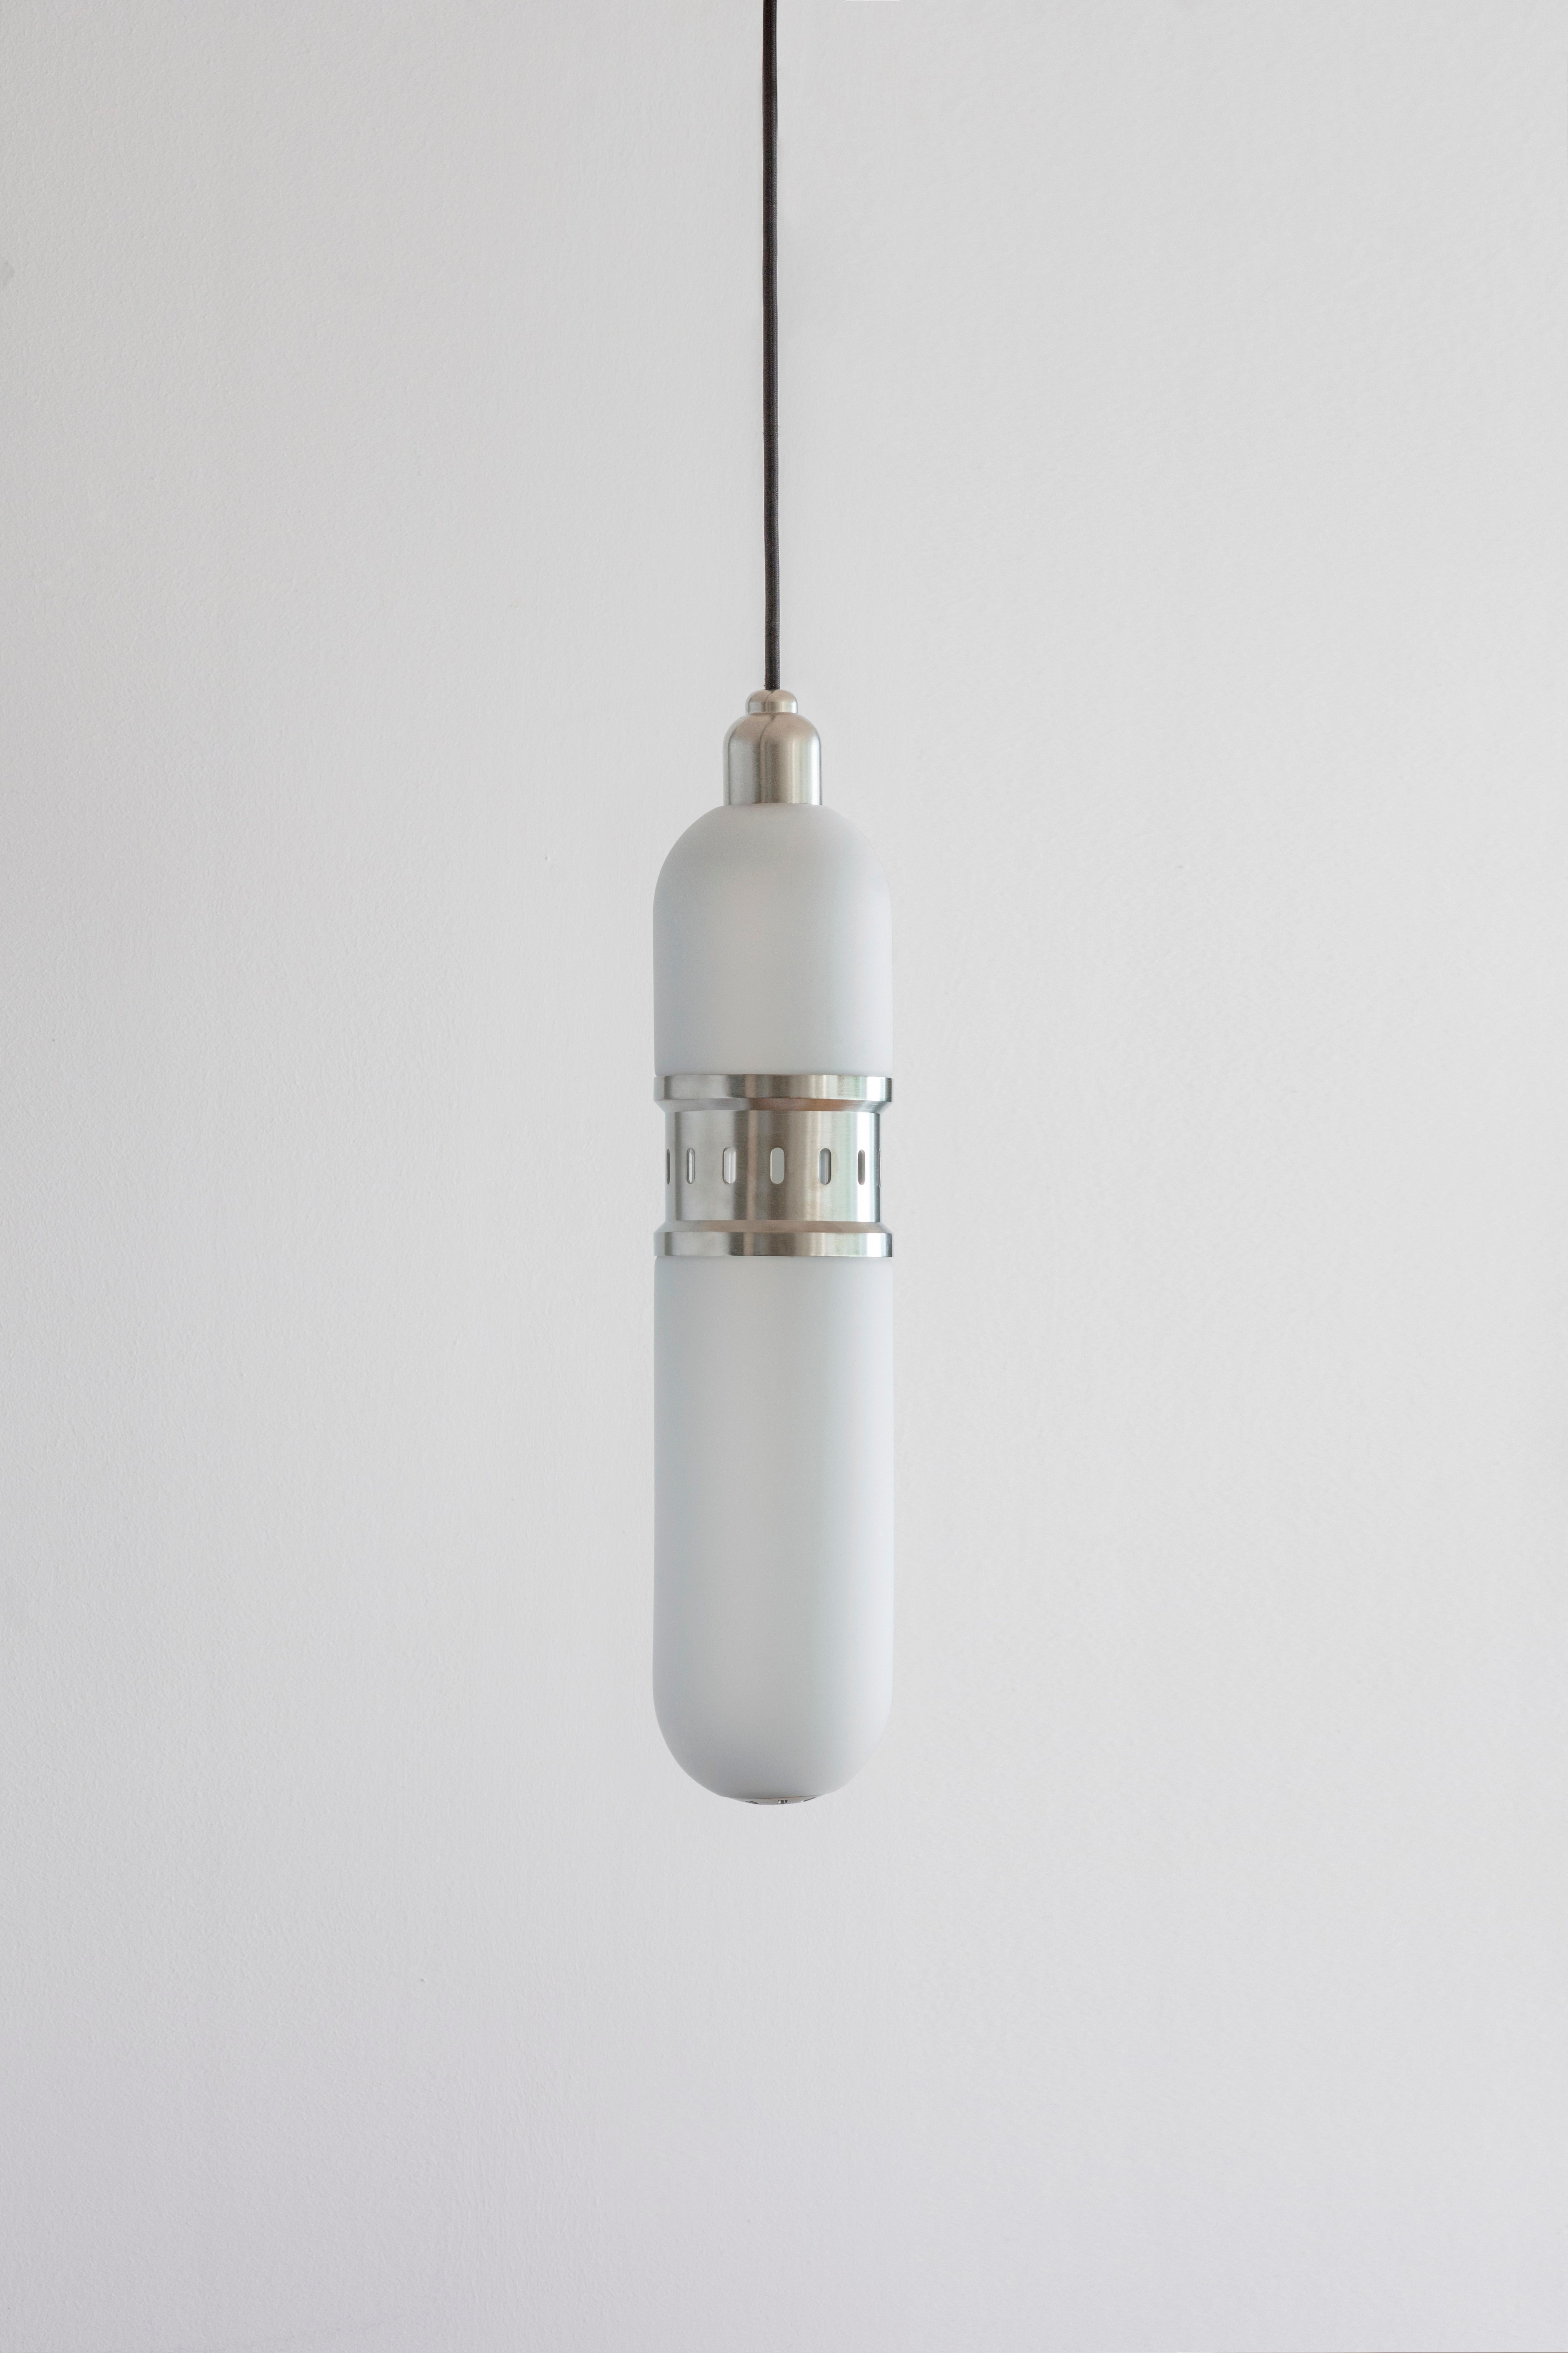 Occulo nickel pendant lamp by Bert Frank
Dimensions: 35 x H 46 cm 
Materials: nickel, glass
Available in brushed brass, dark bronze or satin nickel.

All our lamps can be wired according to each country. If sold to the USA it will be wired for